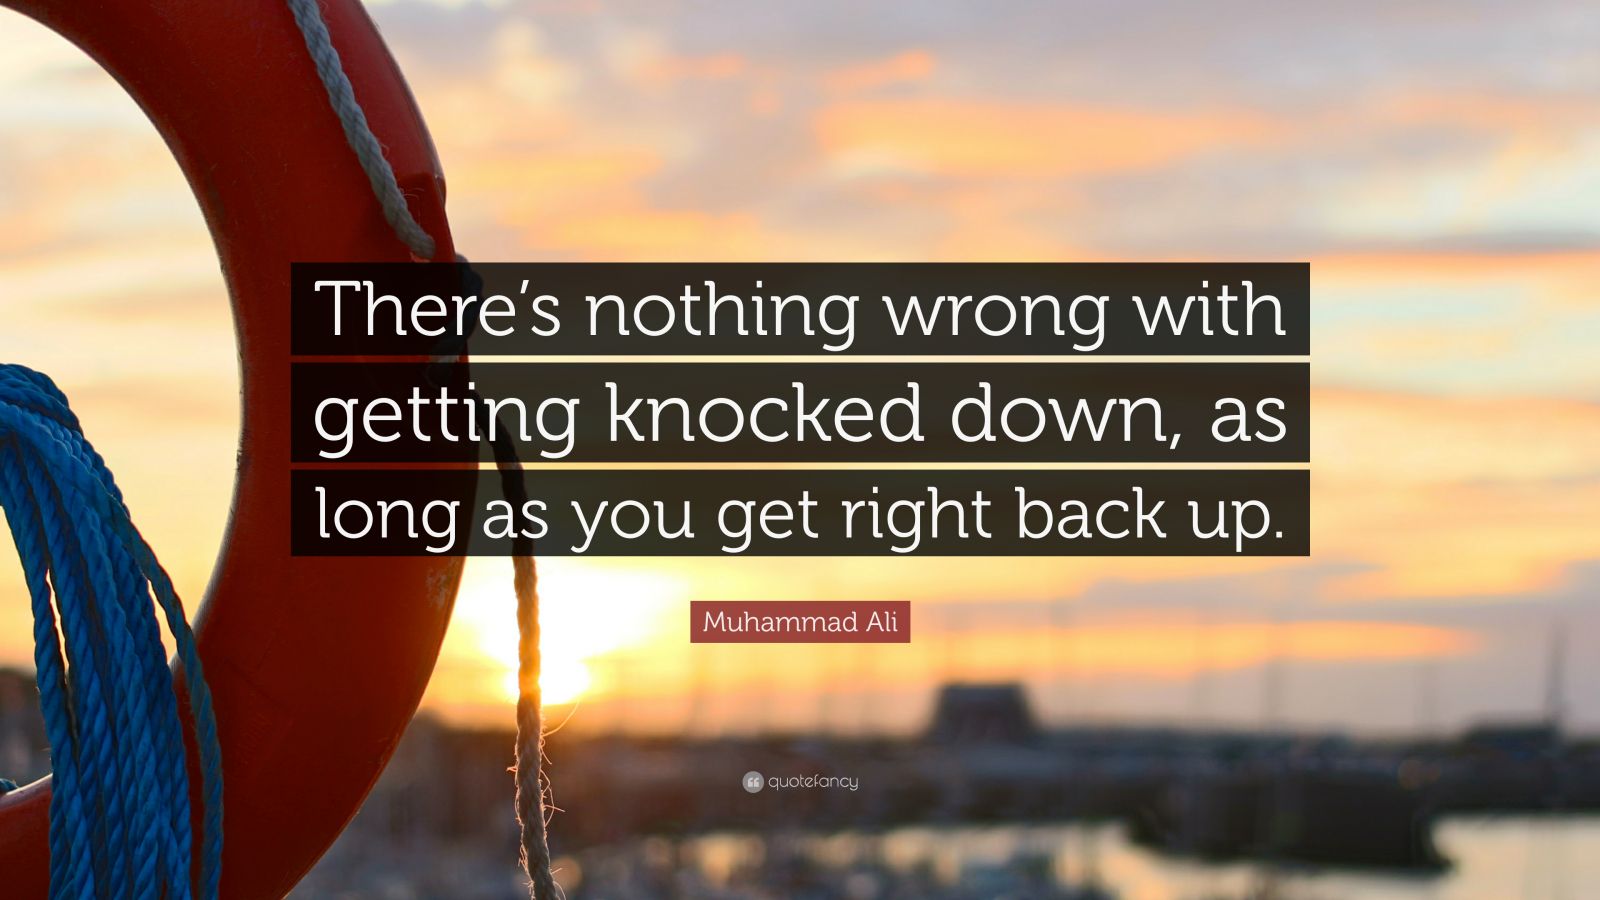 Muhammad Ali Quote: “There’s nothing wrong with getting knocked down